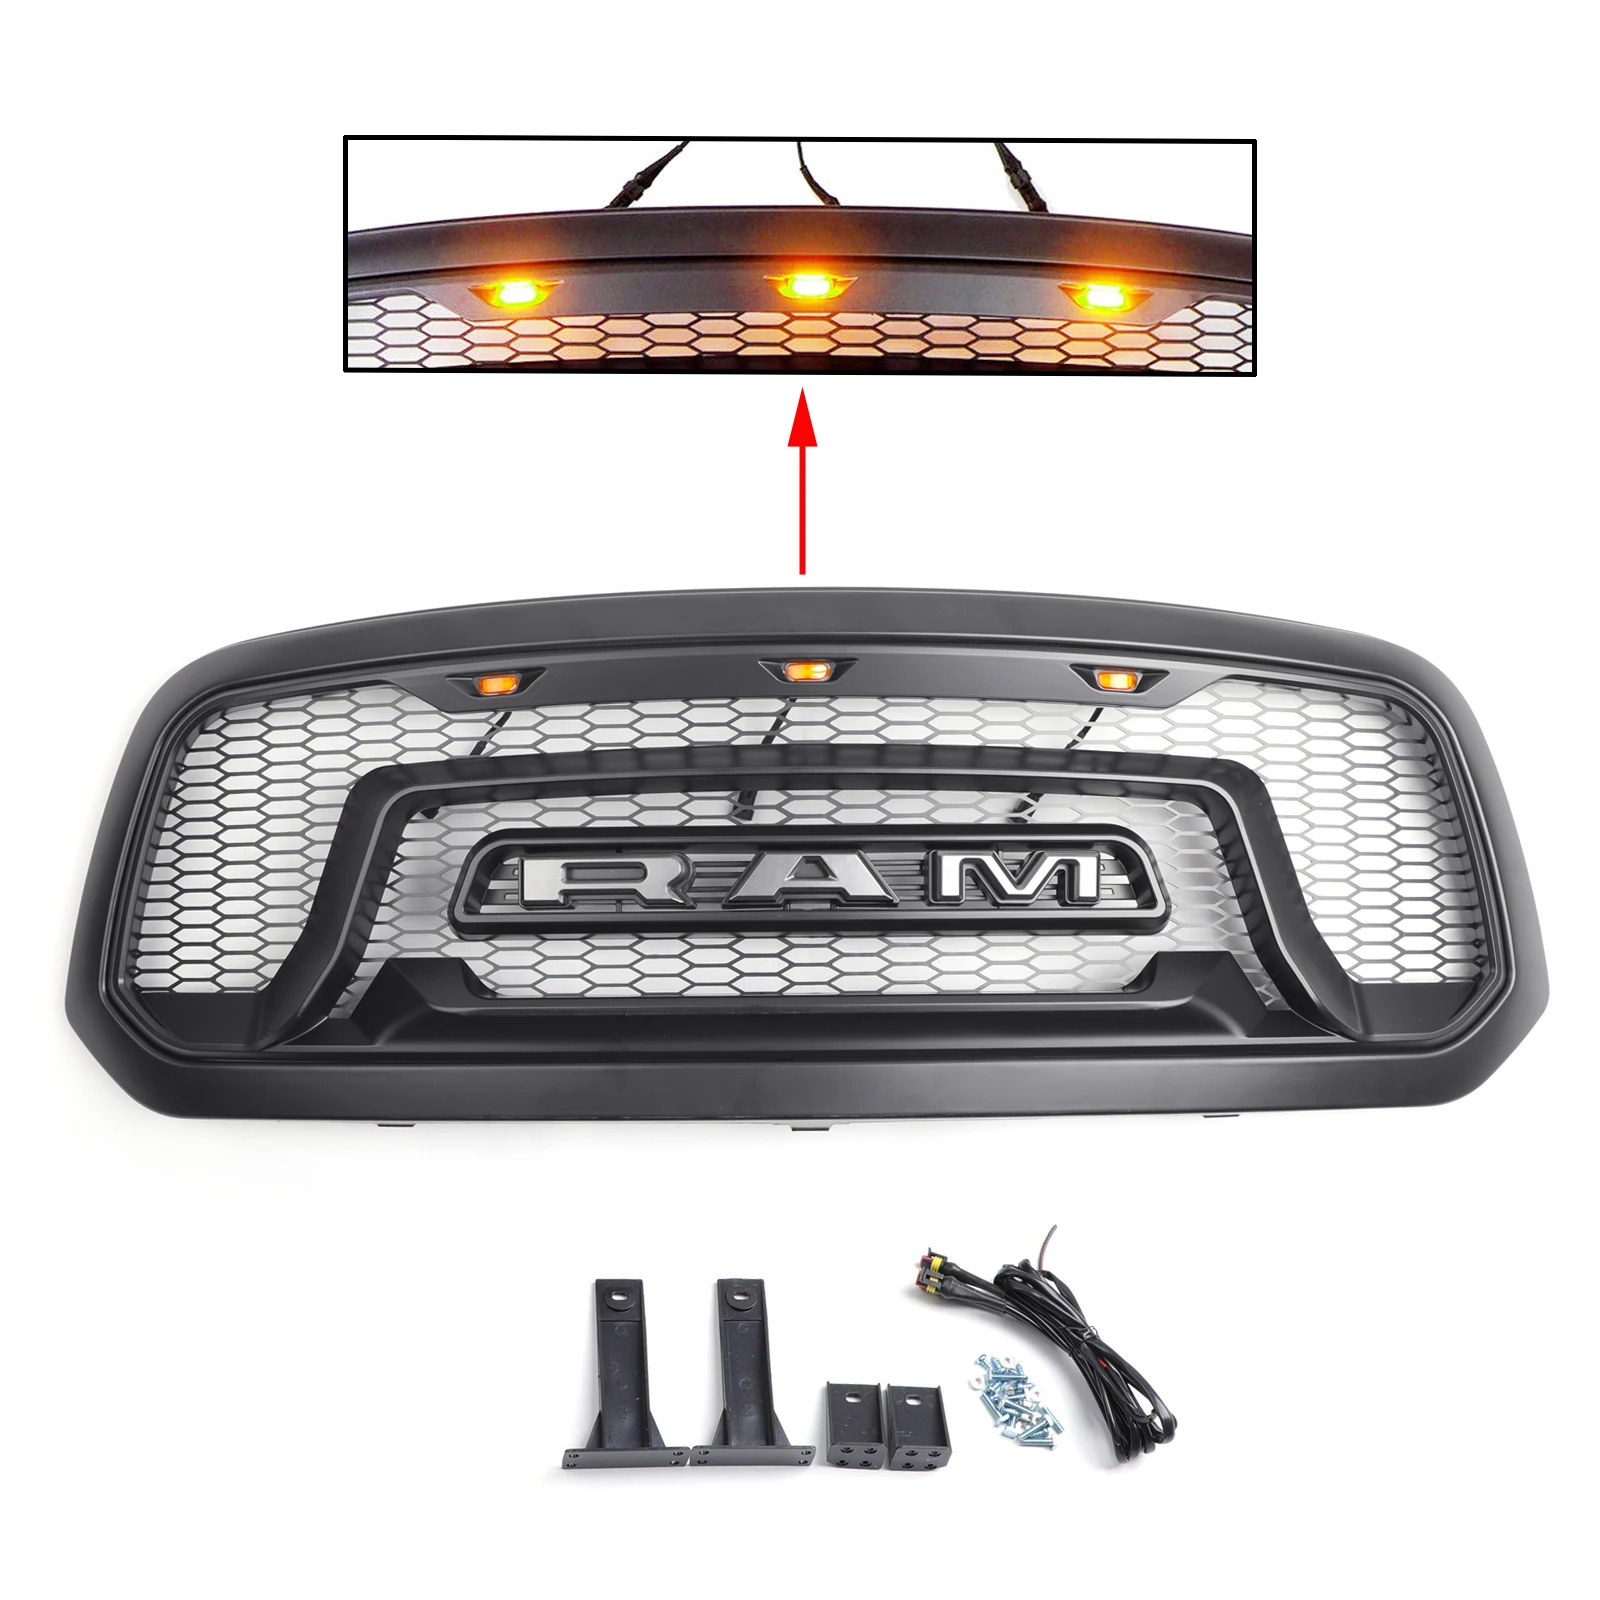 

Front Bumper Hood Grille For Dodge Ram 1500 2013 2014 2015 2016 2017 2018 Car Grille With LED Light With Logo Letter